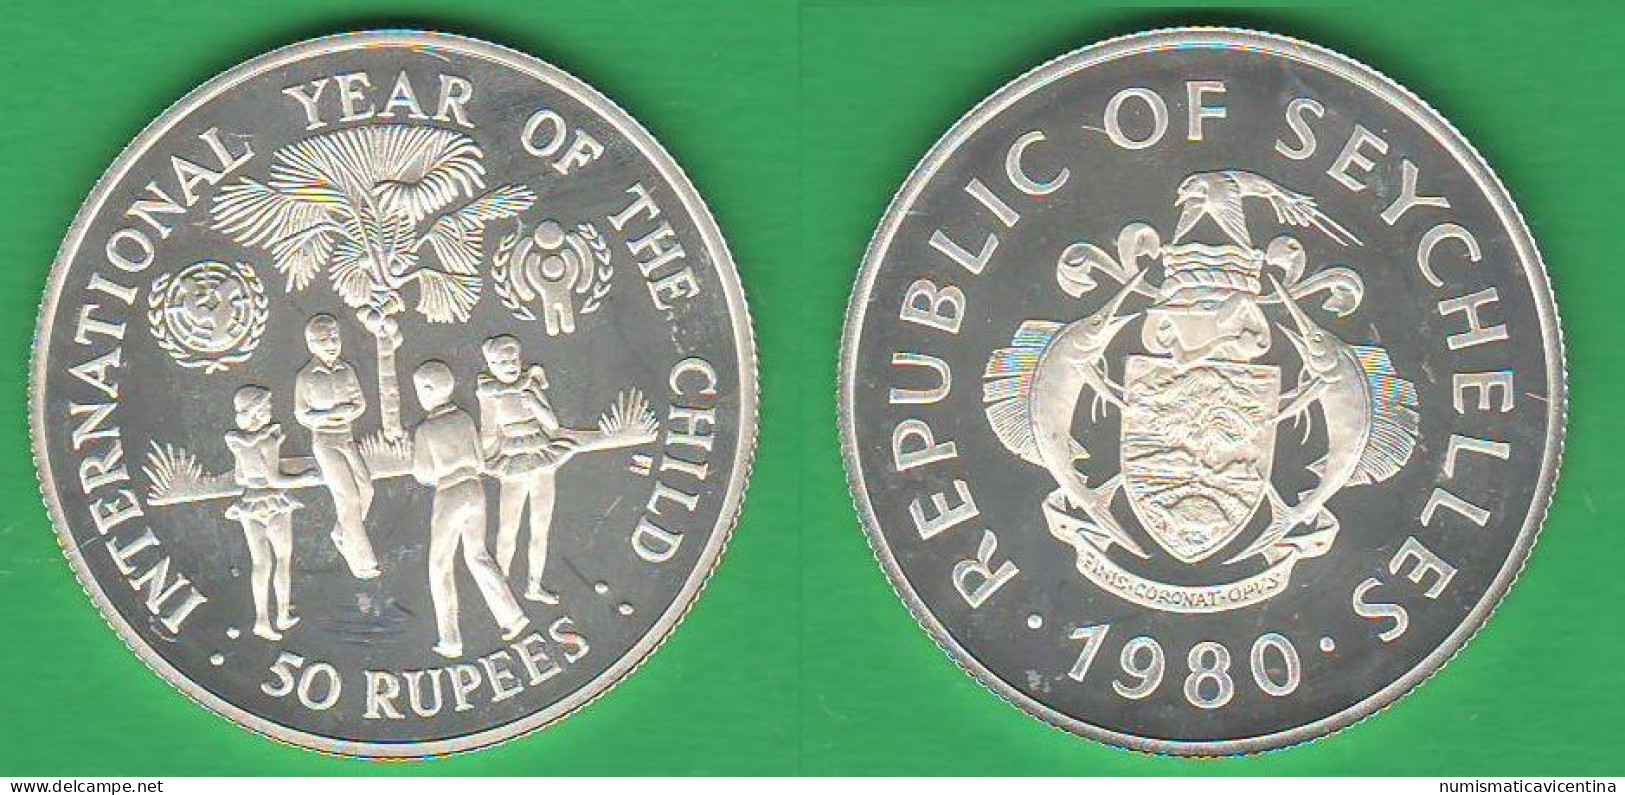 Seycelles 50 Rupee 1980 Year Of The Child Silver Proof Coin   ∇ 2 - Seychelles